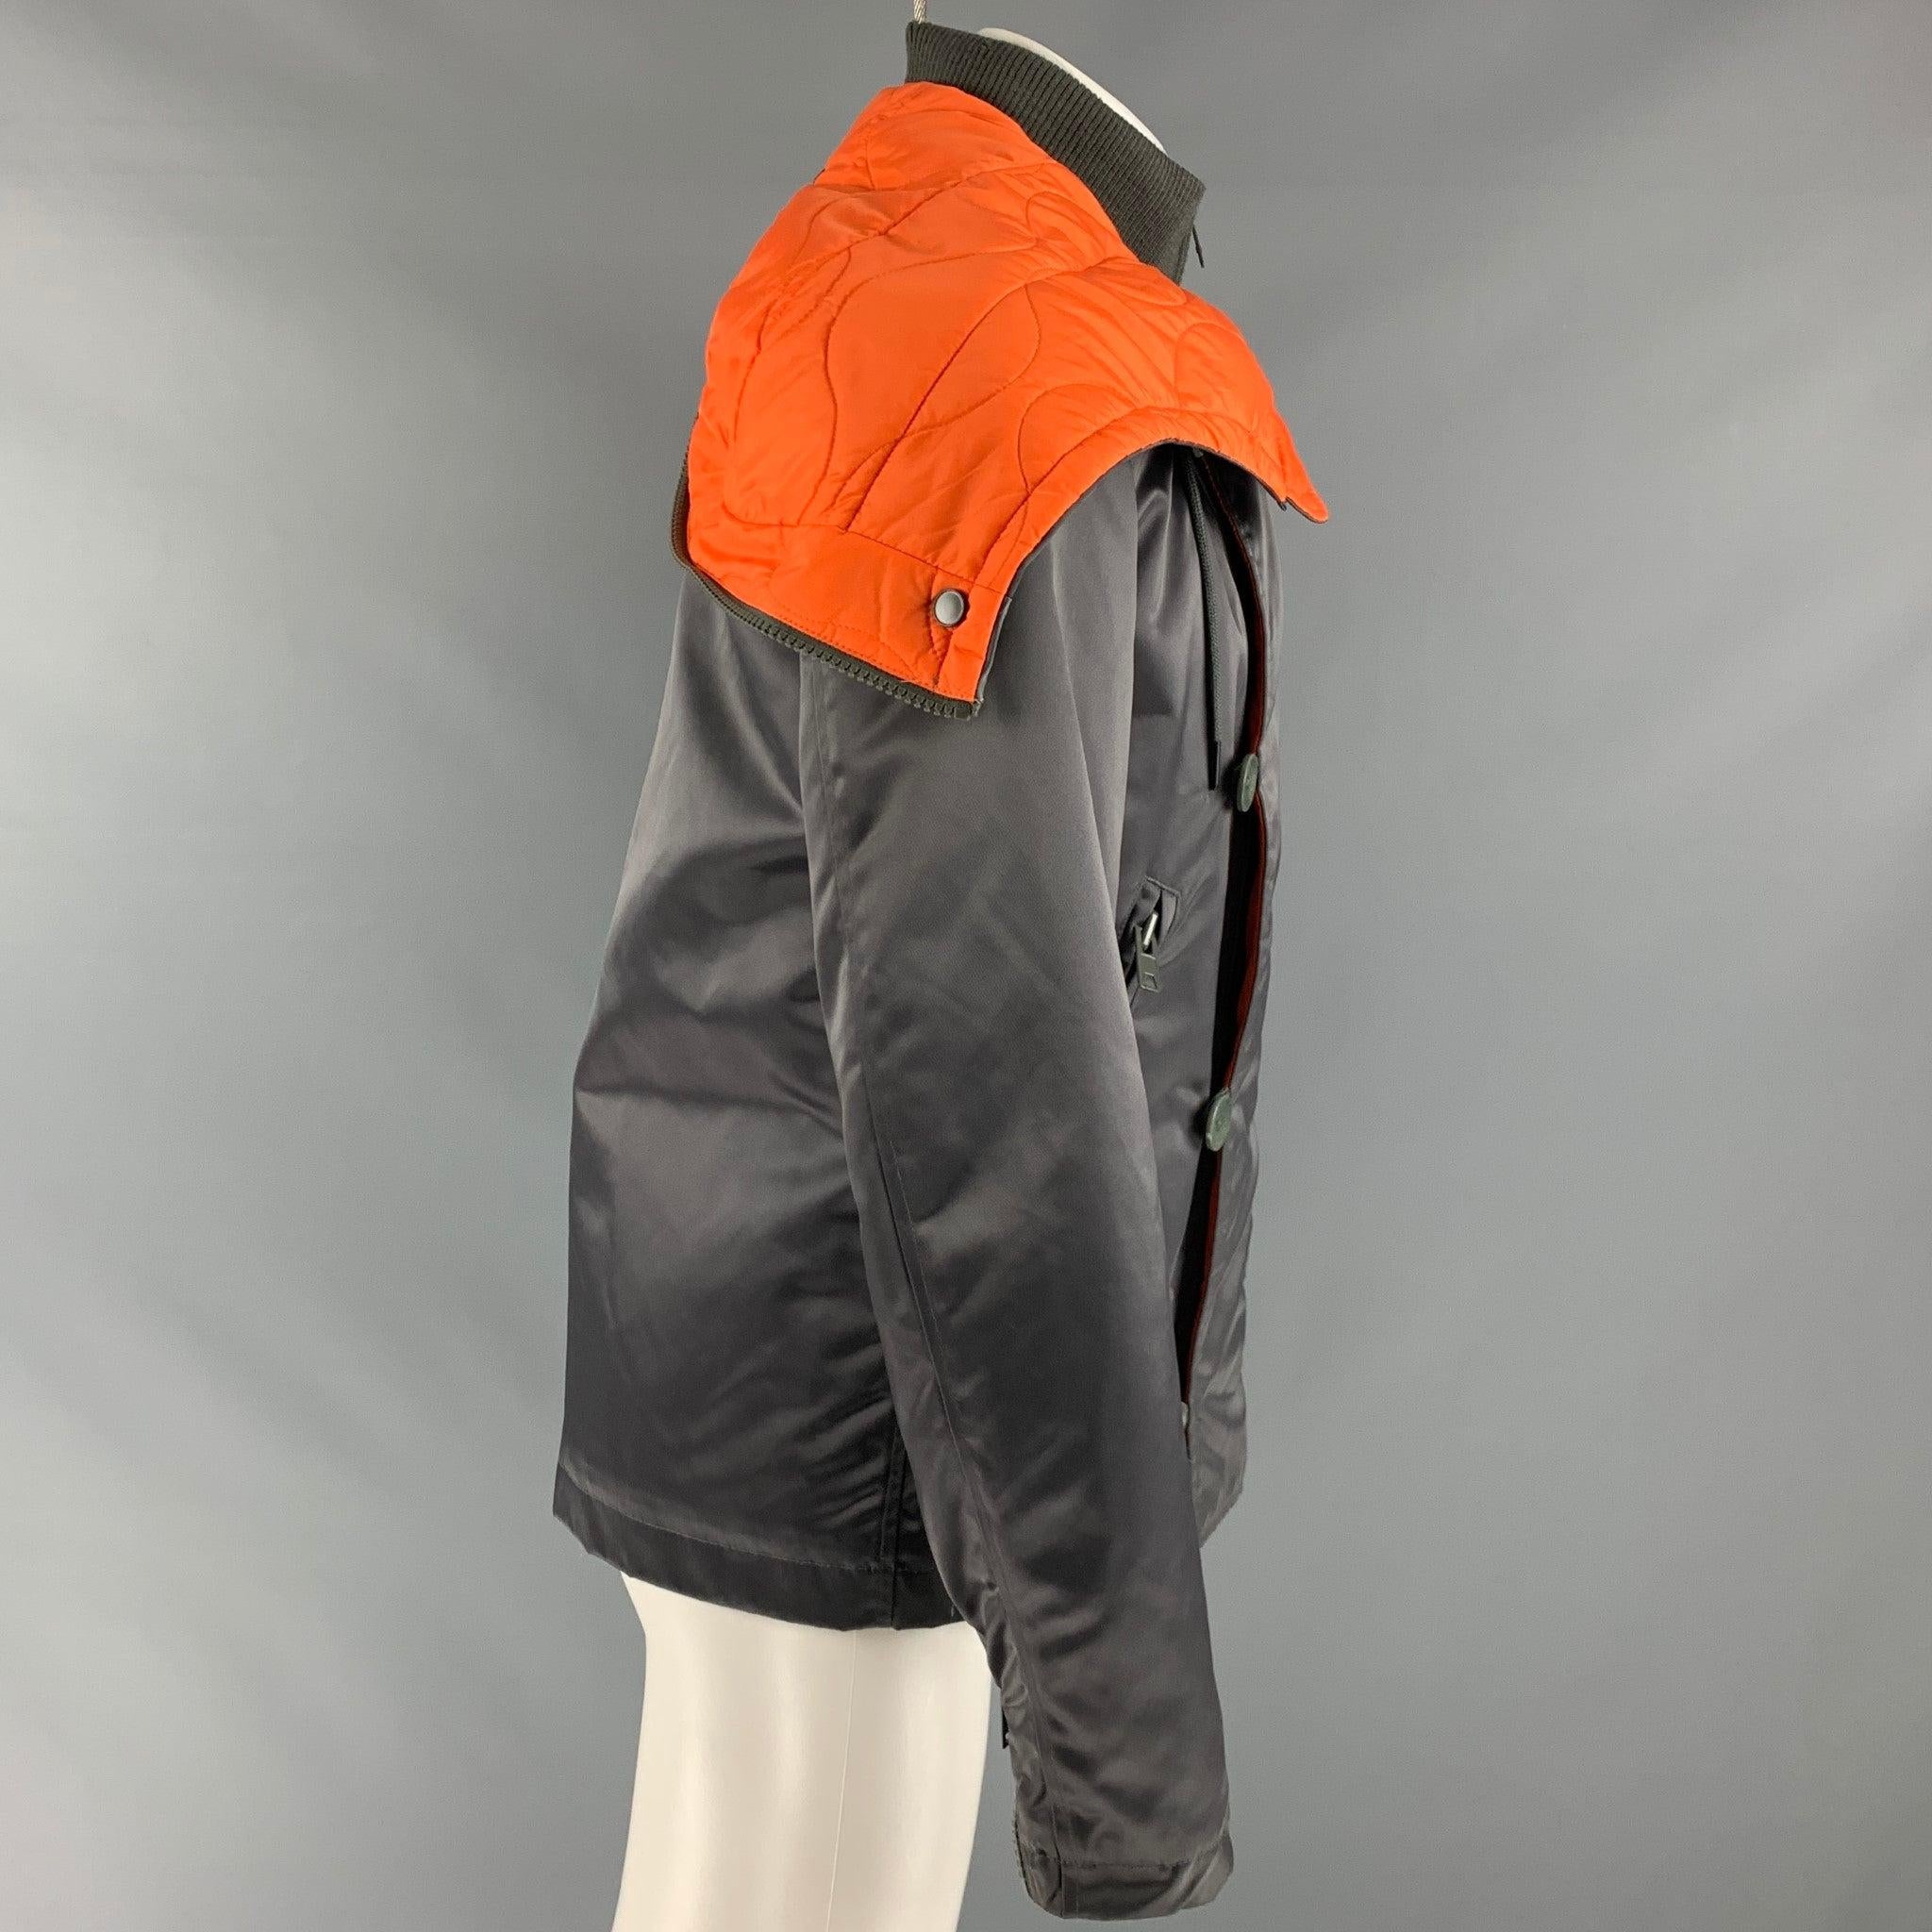 Y-3 x ADIDAS jacket comes in a grey and orange polyamide blend woven material featuring a two-in-one style, an front panel with buttons, drawstring,
 removable hood layer, zipper cuffs, and zip up pockets.Good Pre-Owned Condition. Moderate signs of